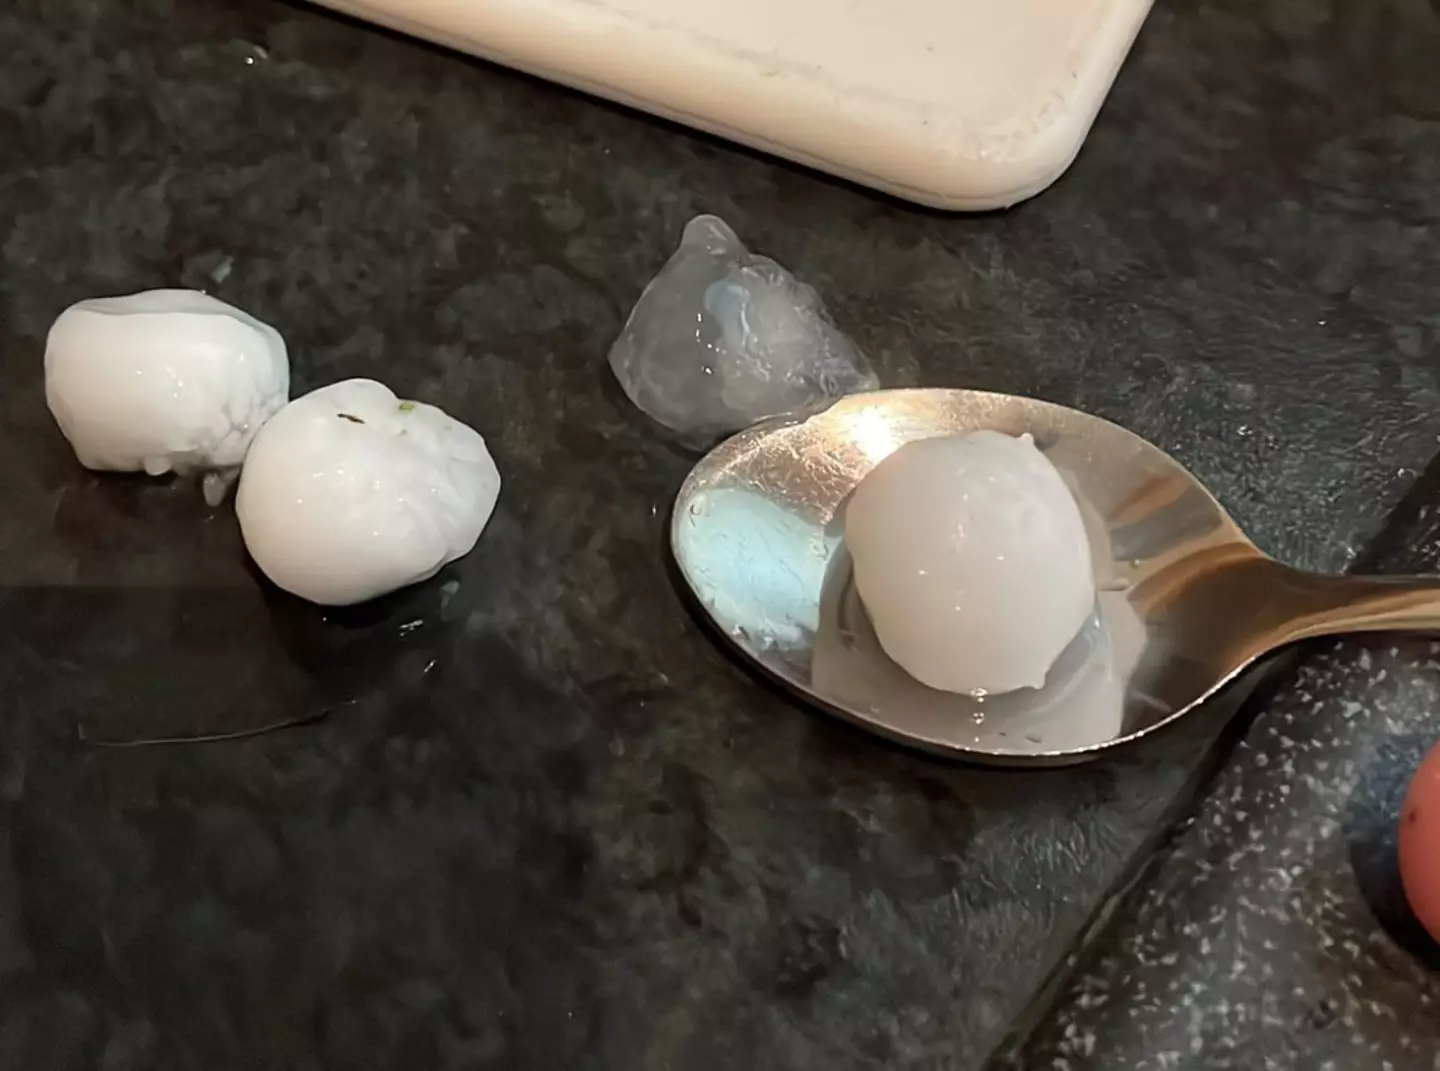 It was the 'biggest hail' some UK residents had ever seen.